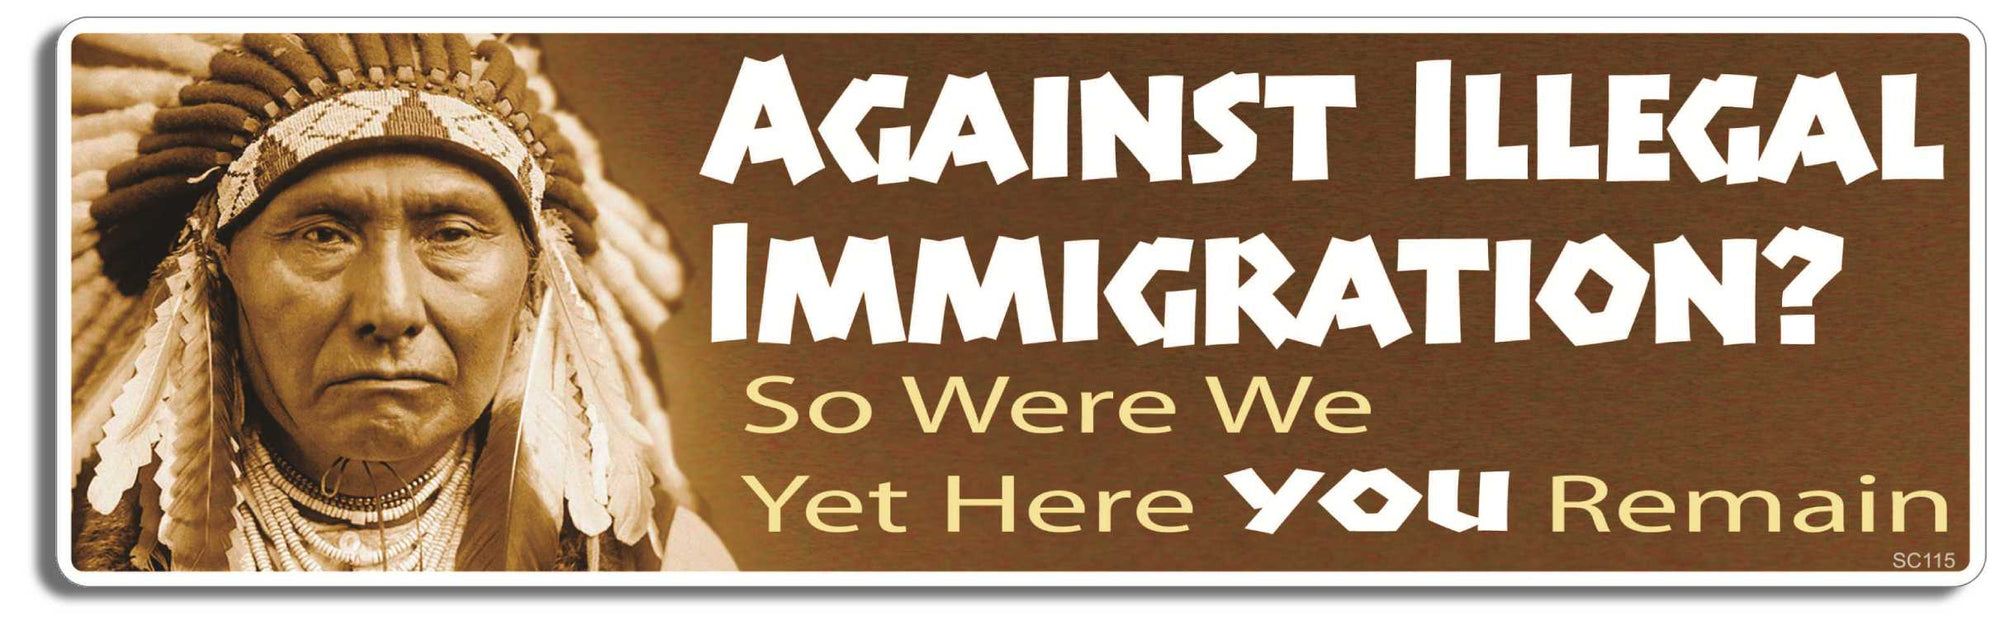 Against Illegal Immigration? So were we, yet here YOU remain - 3" x 10" Bumper Sticker--Car Magnet- -  Decal Bumper Sticker-political Bumper Sticker Car Magnet Against Illegal Immigration? So were-  Decal for carsconservative, liberal, Political